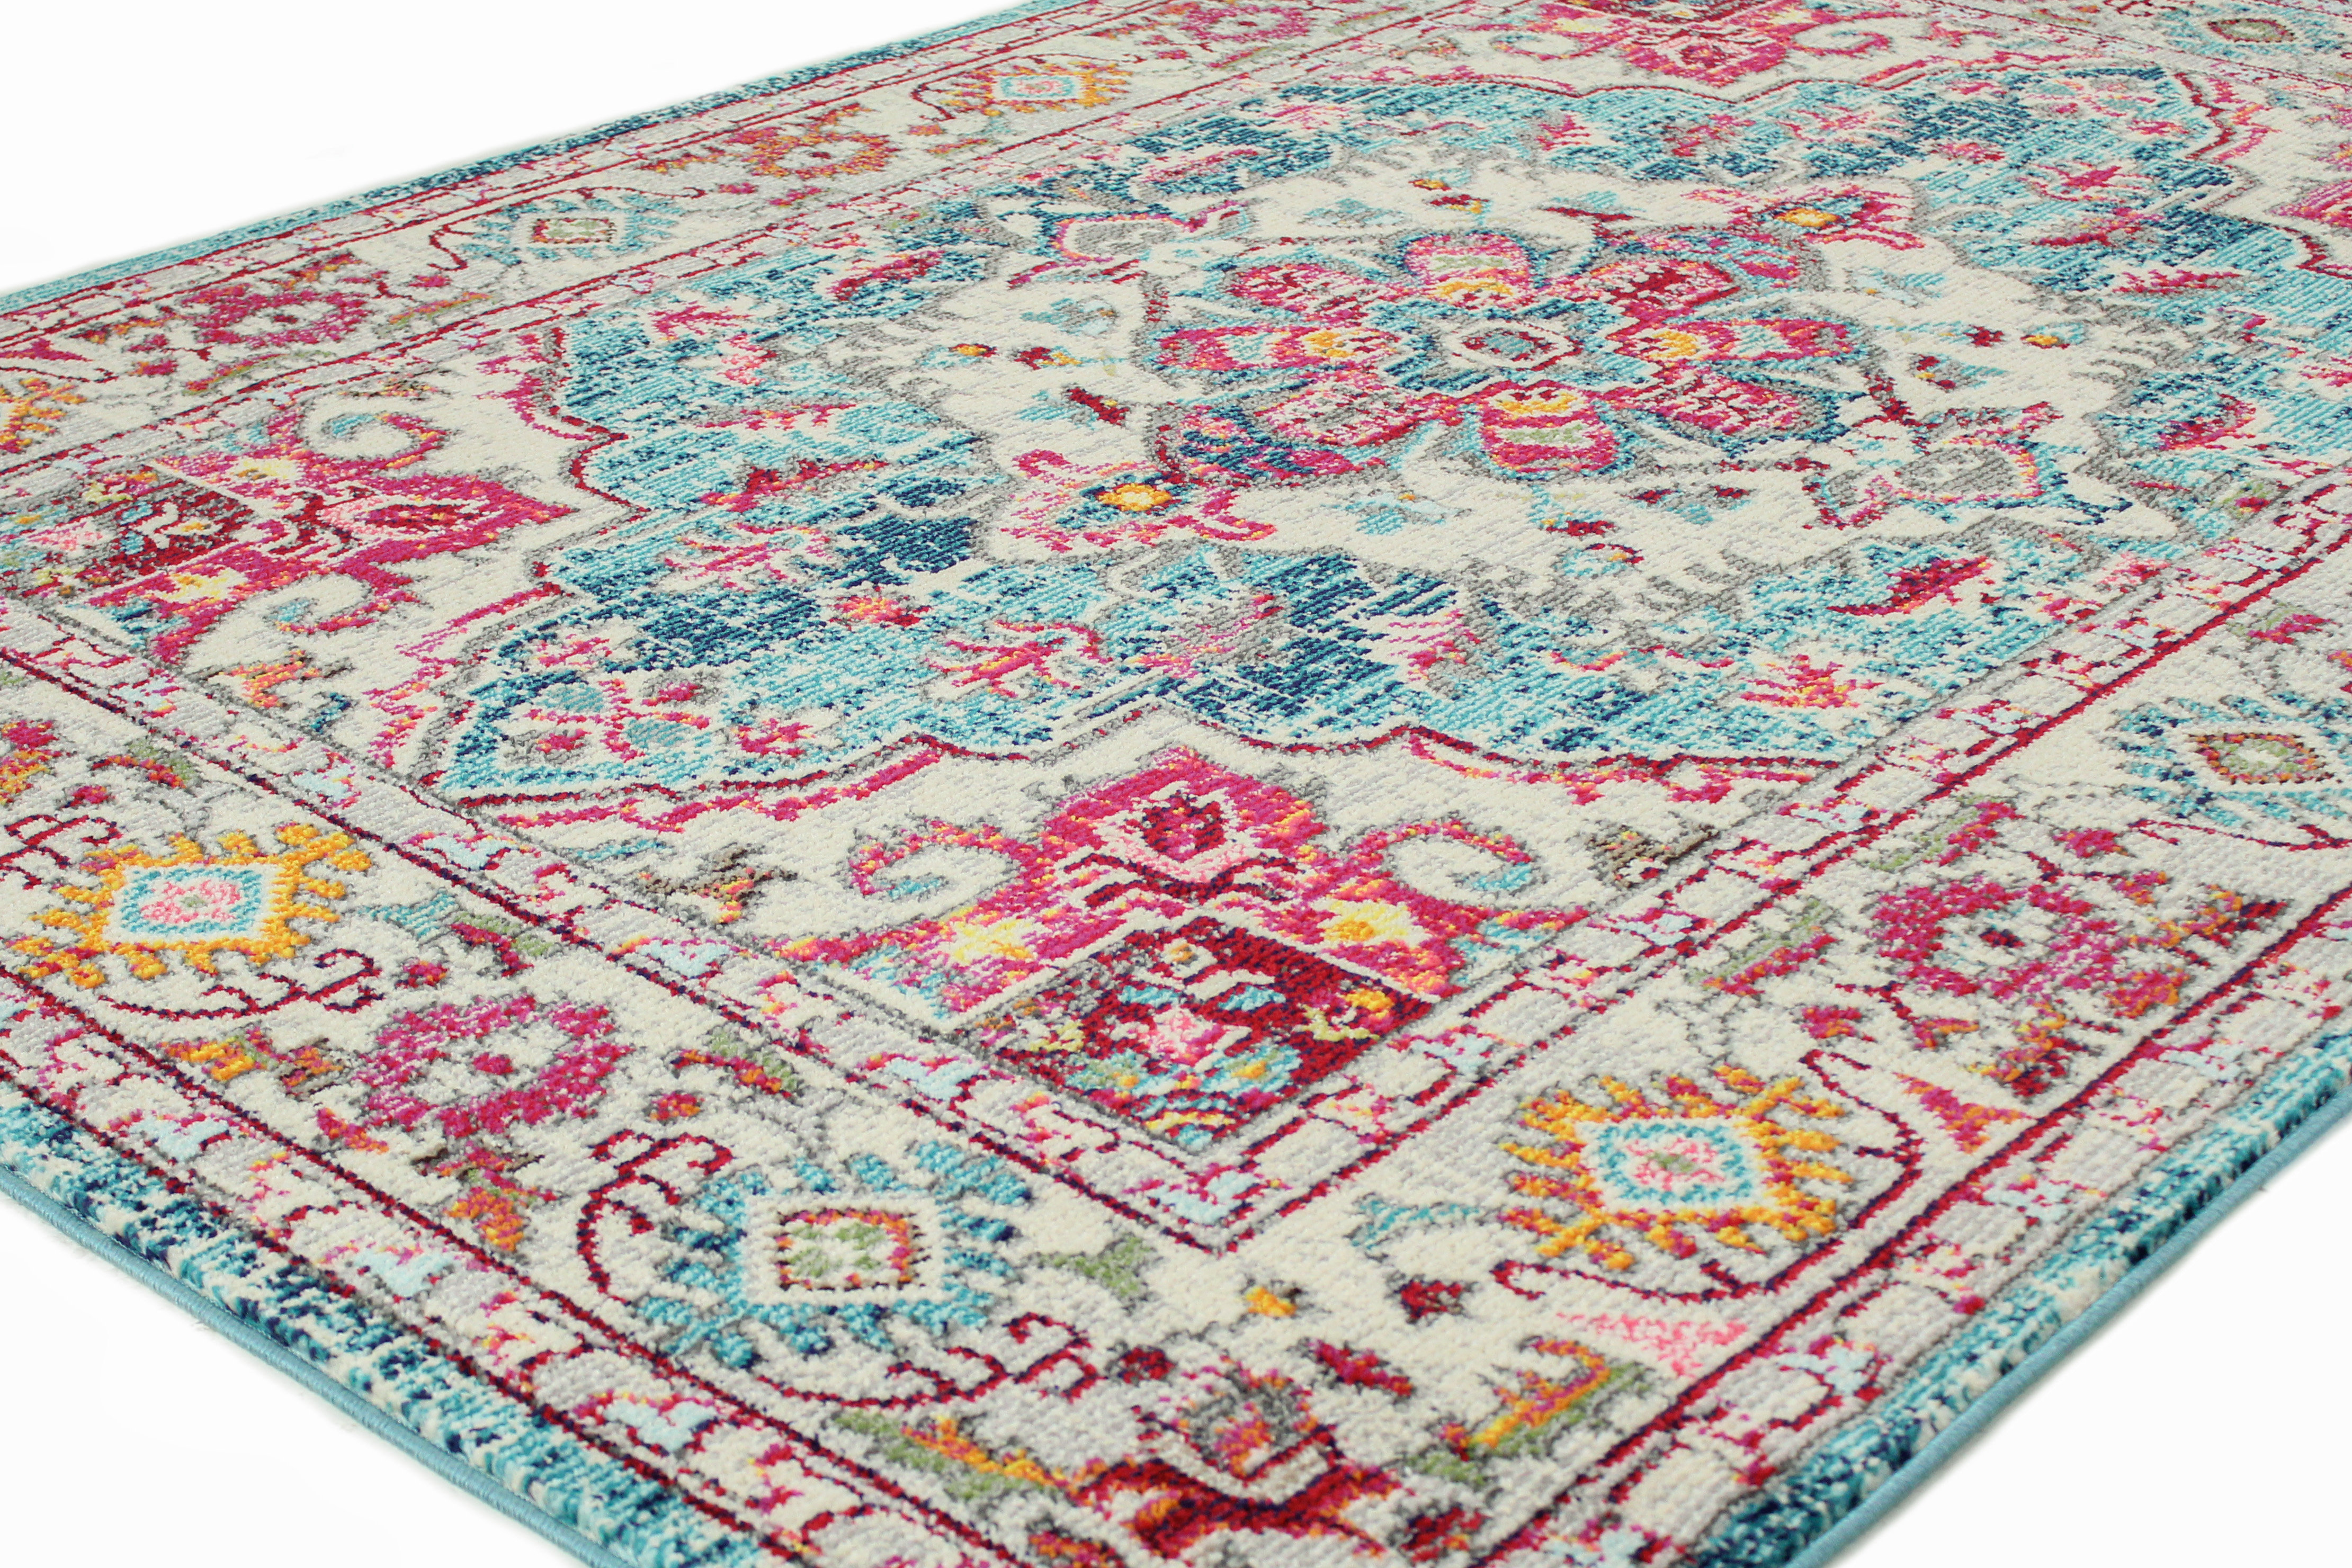 It consists of wool It is one of the old Turkish carpets.Free shipping. Decaration is suitable at home The support material is cotton